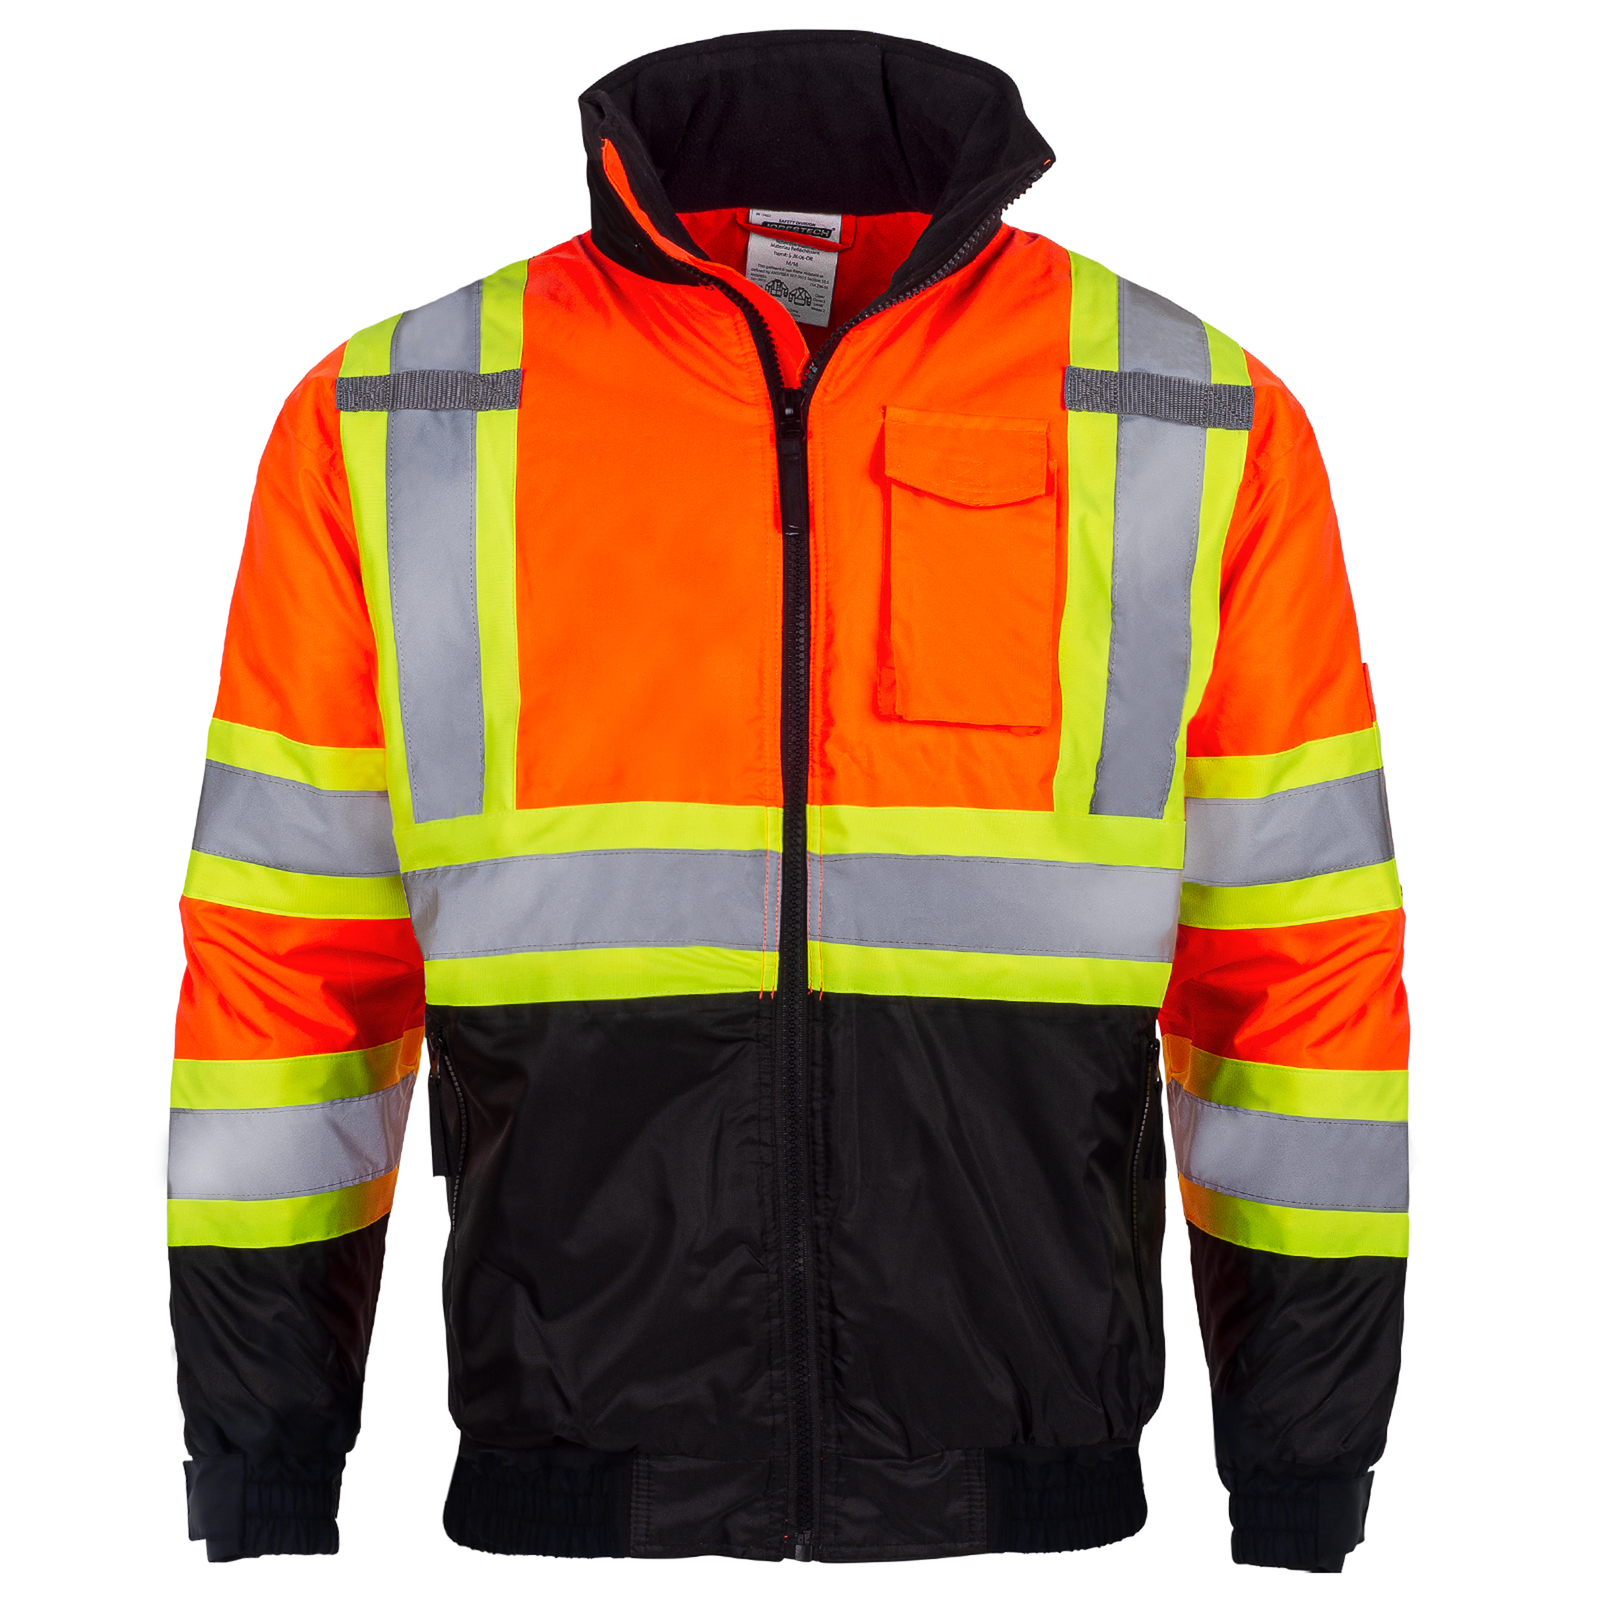 Orange JORESTECH Hi-vis two tone safety bomber jacket with reflective stripes and a reflective X on the back